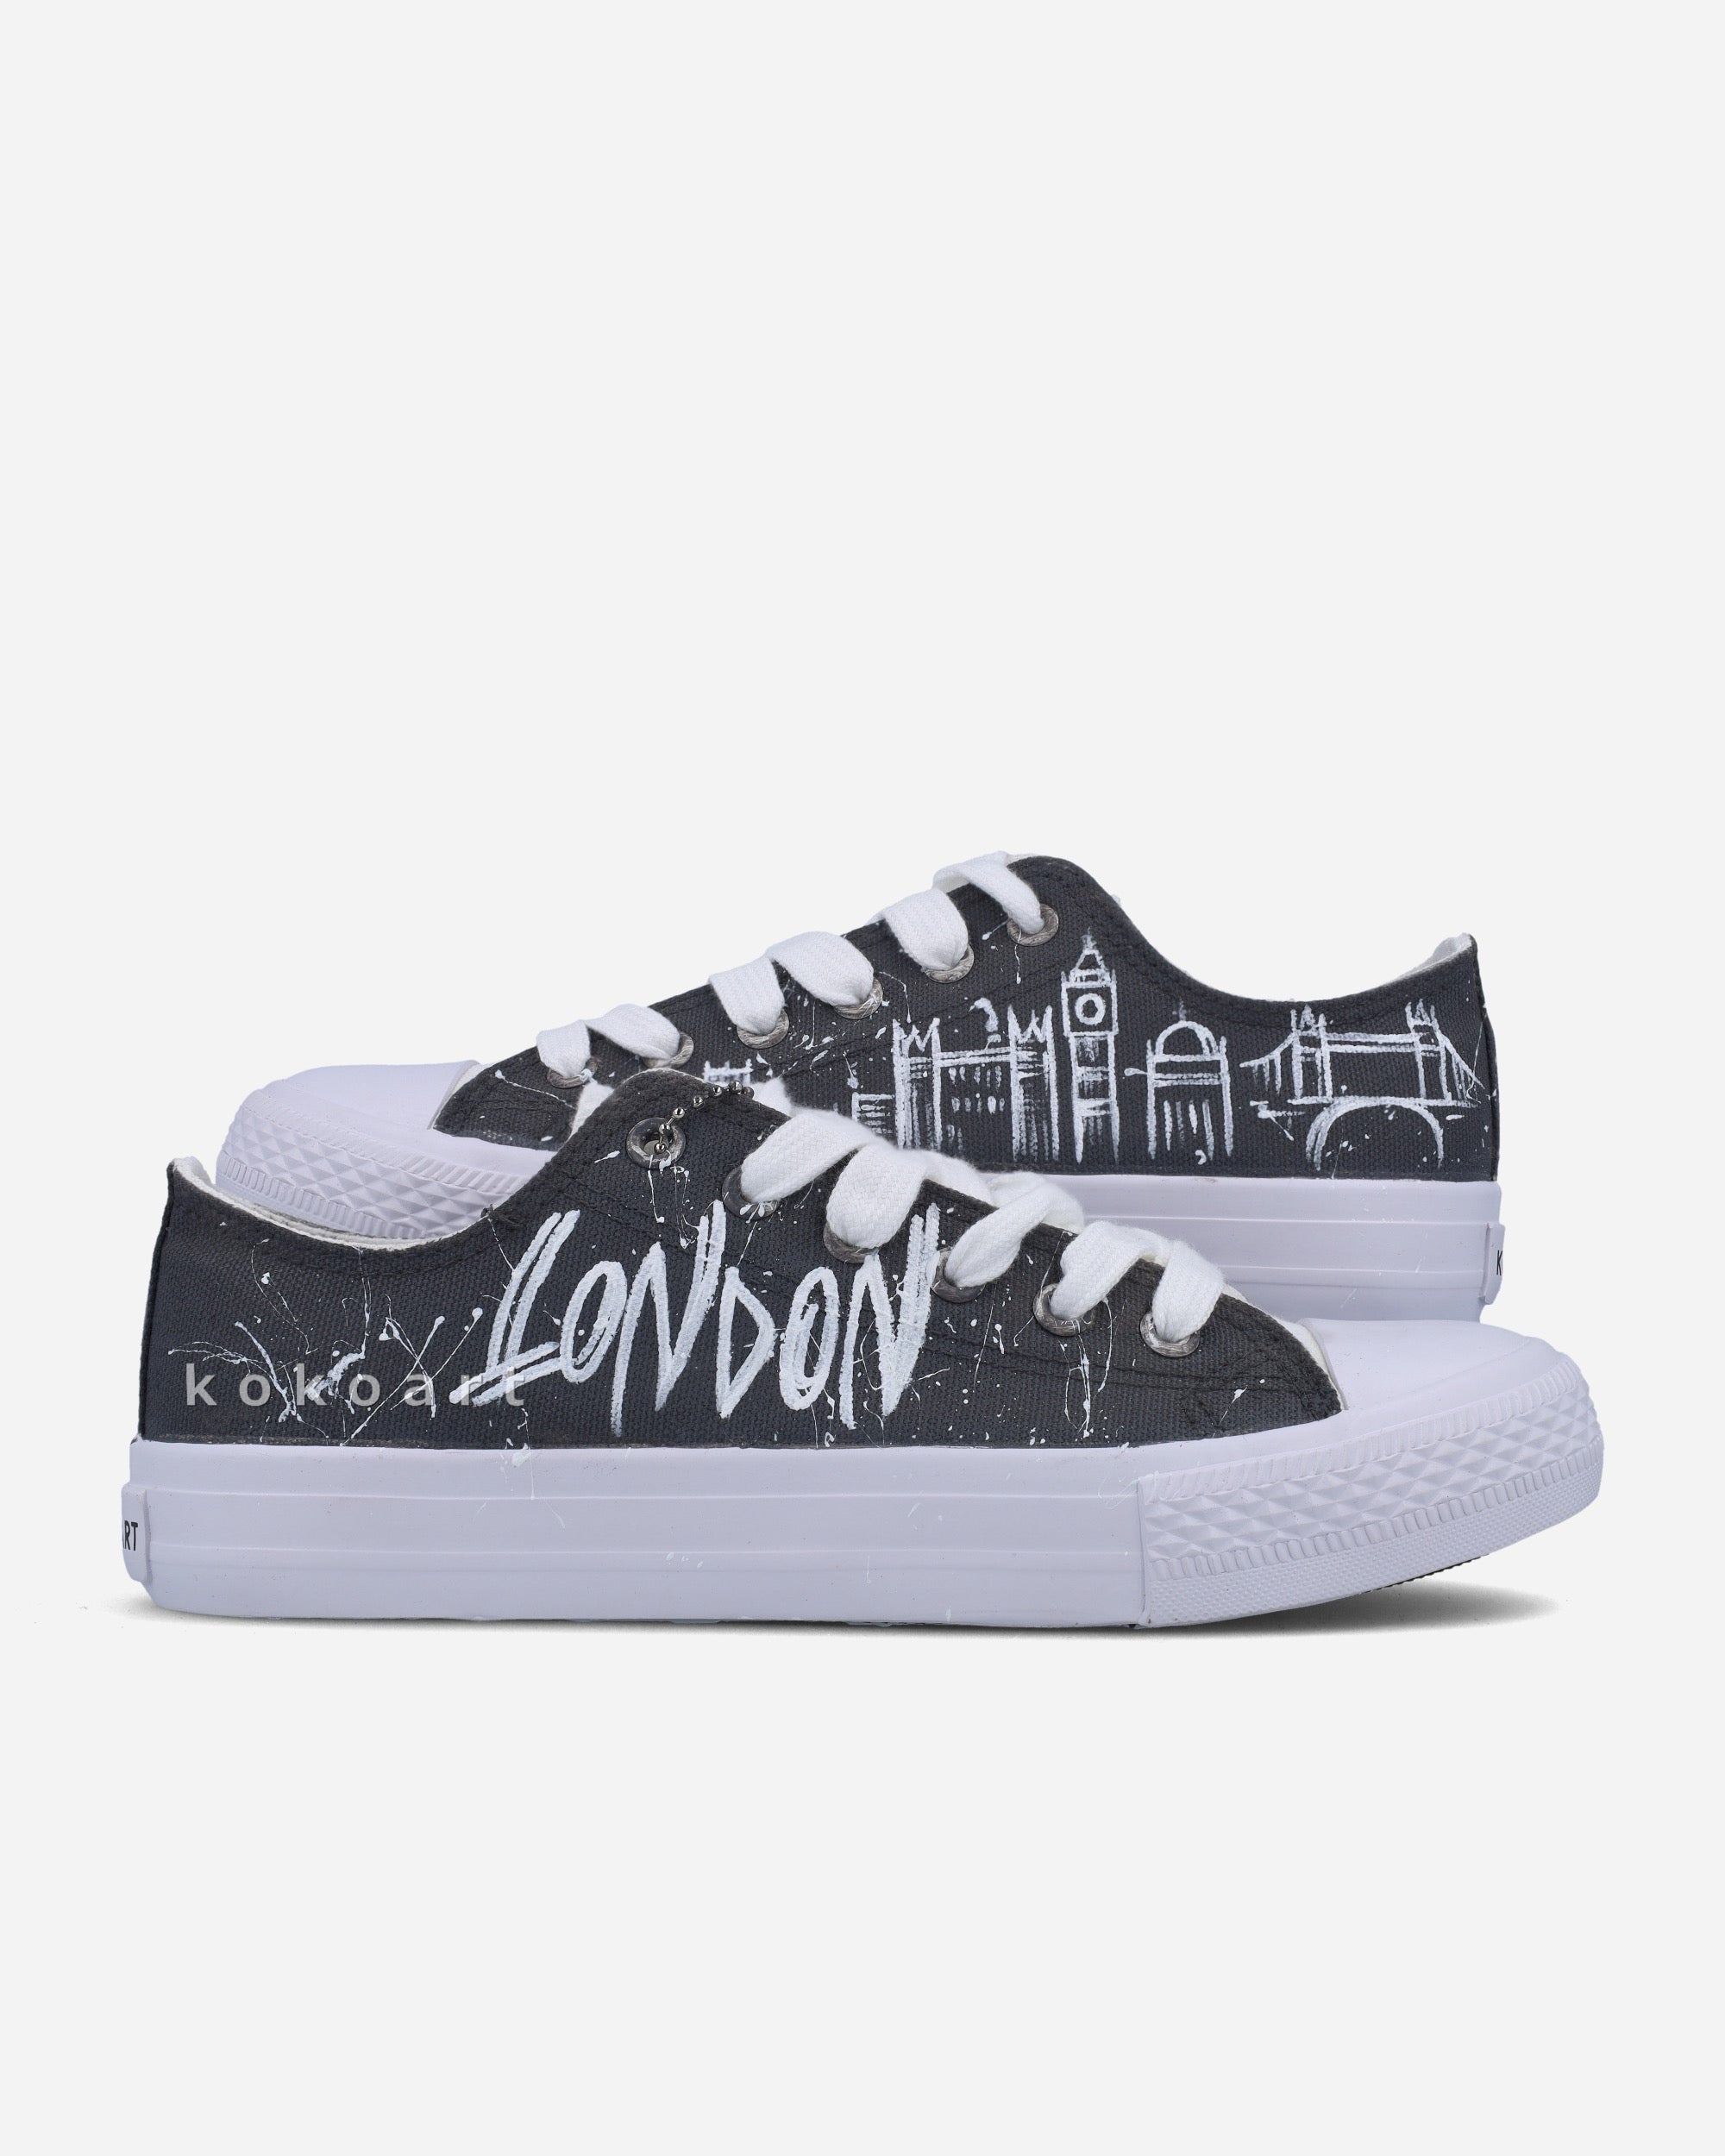 London Black and Grey Skyline Hand Painted Shoes